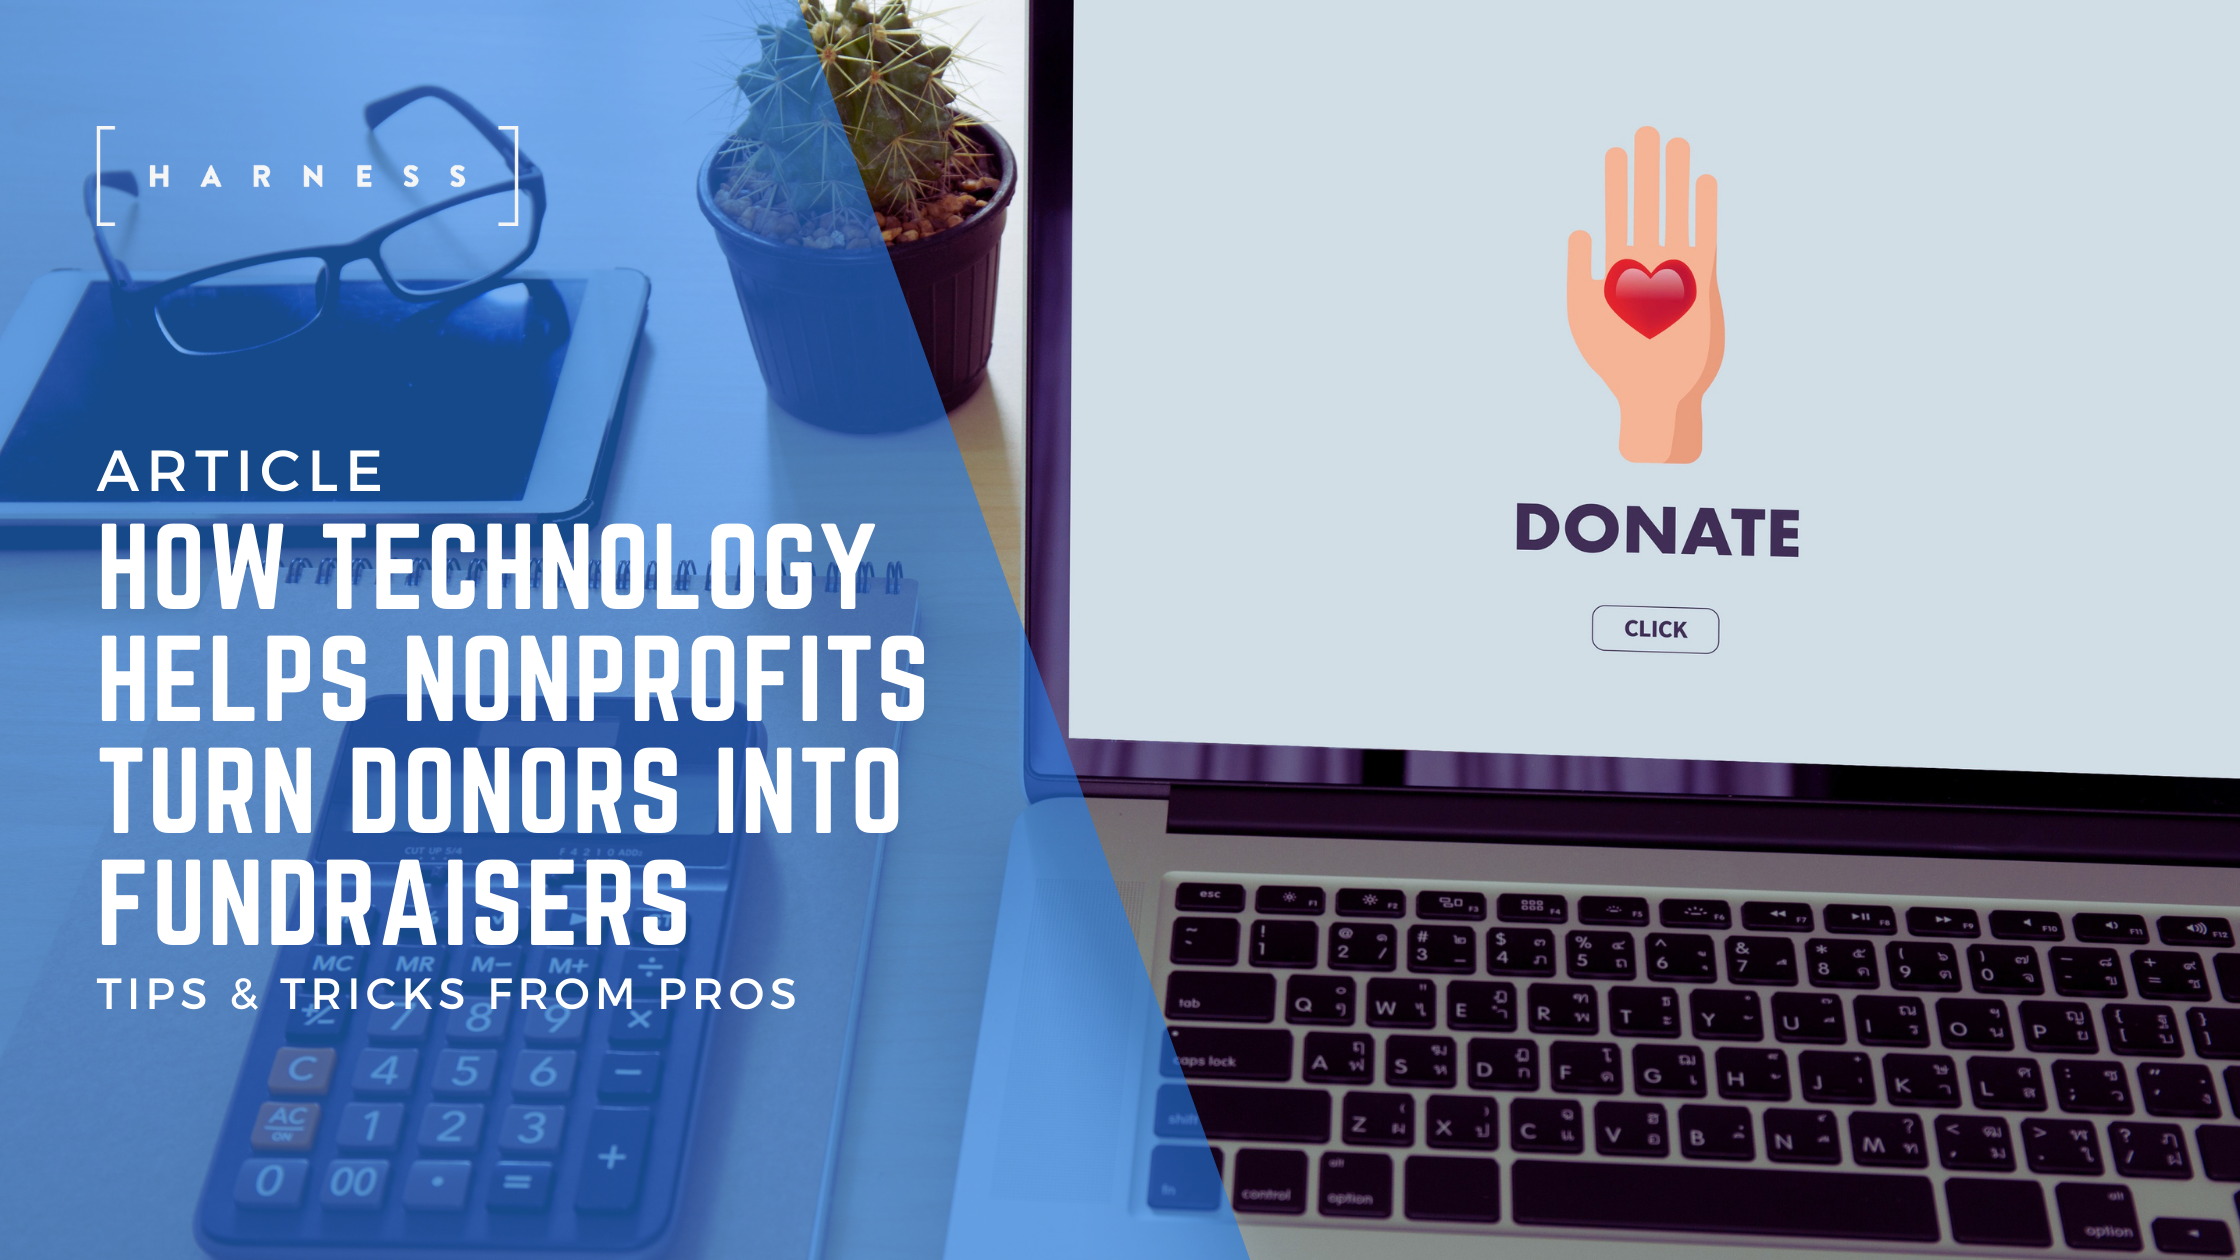 How Technology Helps Nonprofits Turn Donors Into Fundraisers